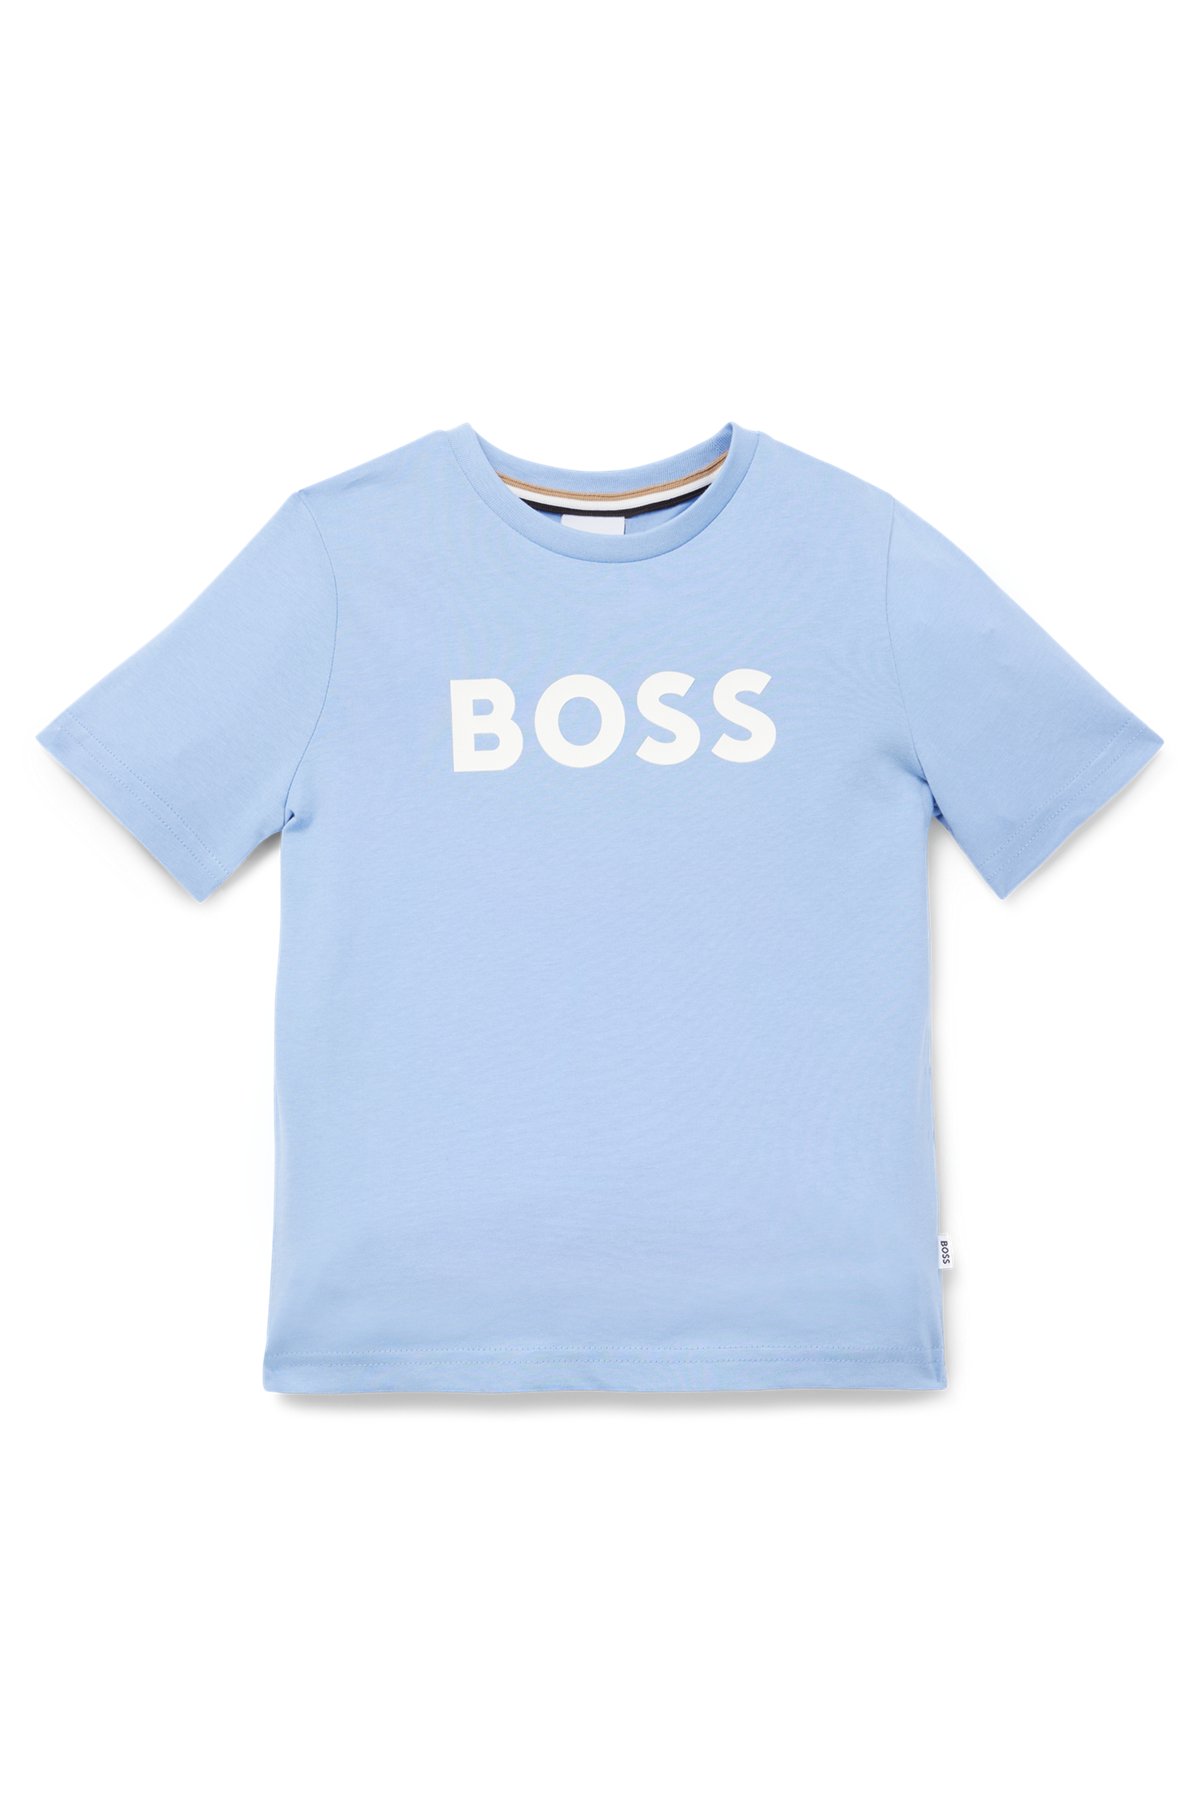 Kids' T-shirt in with logo print, Light Blue